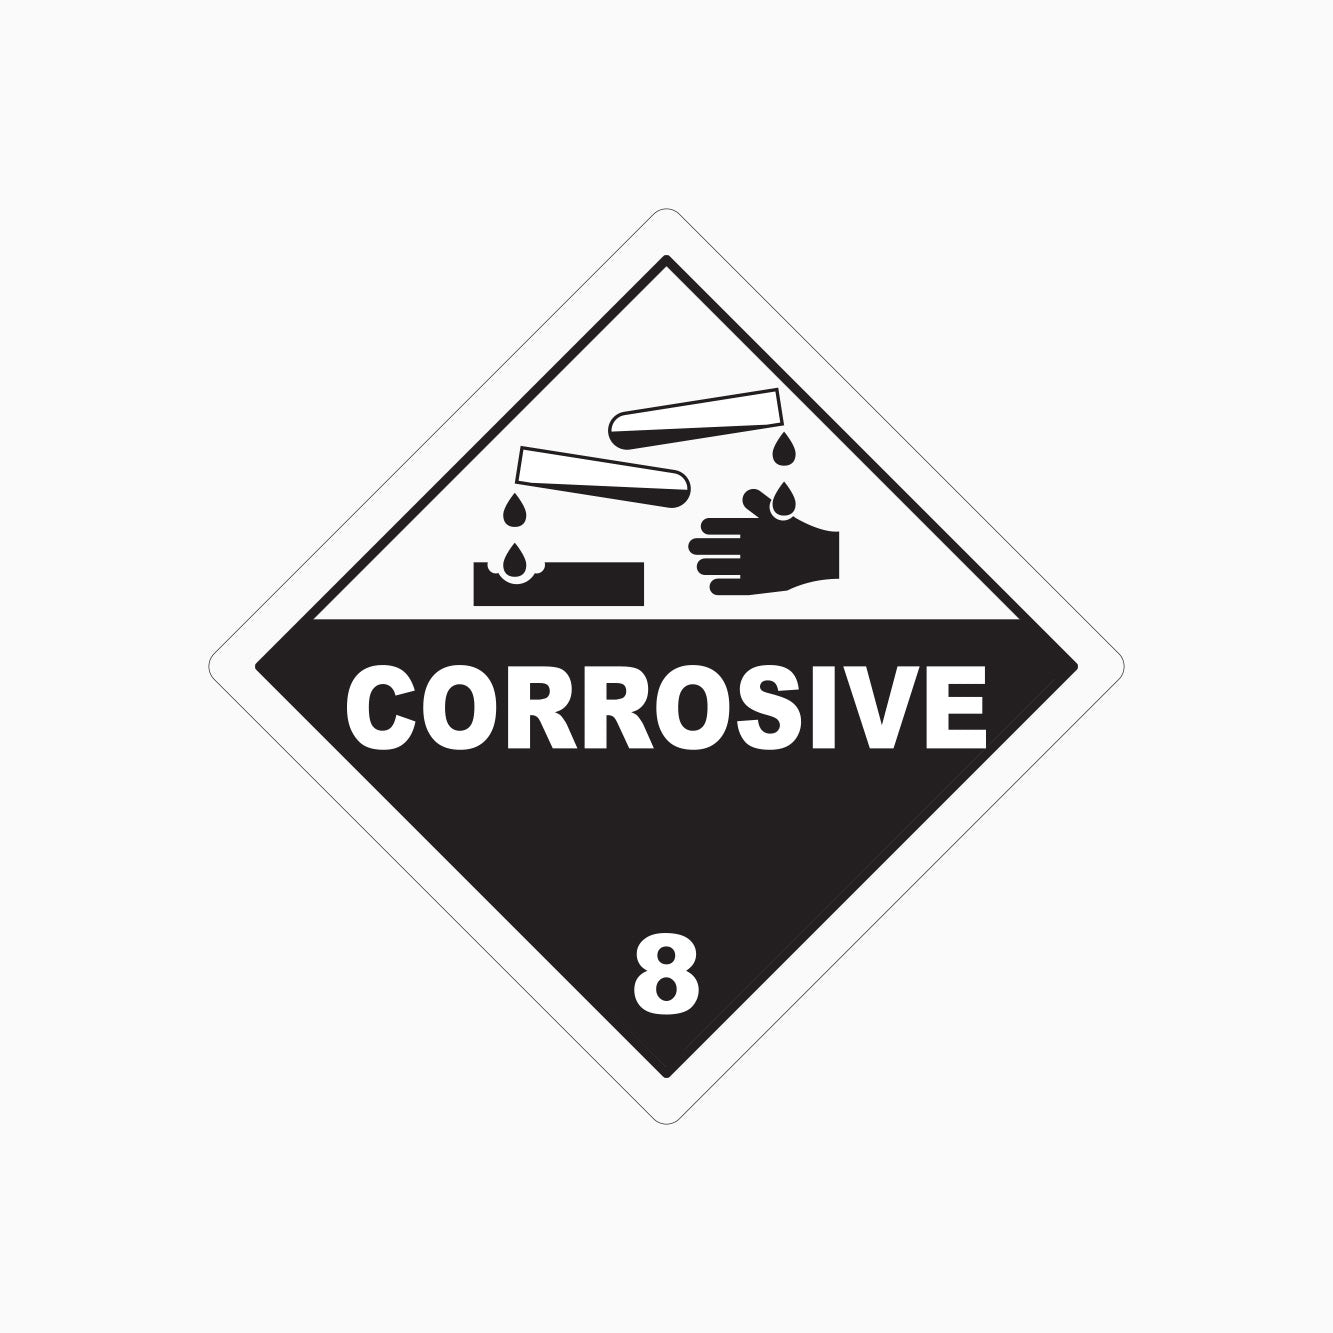 CORROSIVE 8 SIGN - GET SIGNS